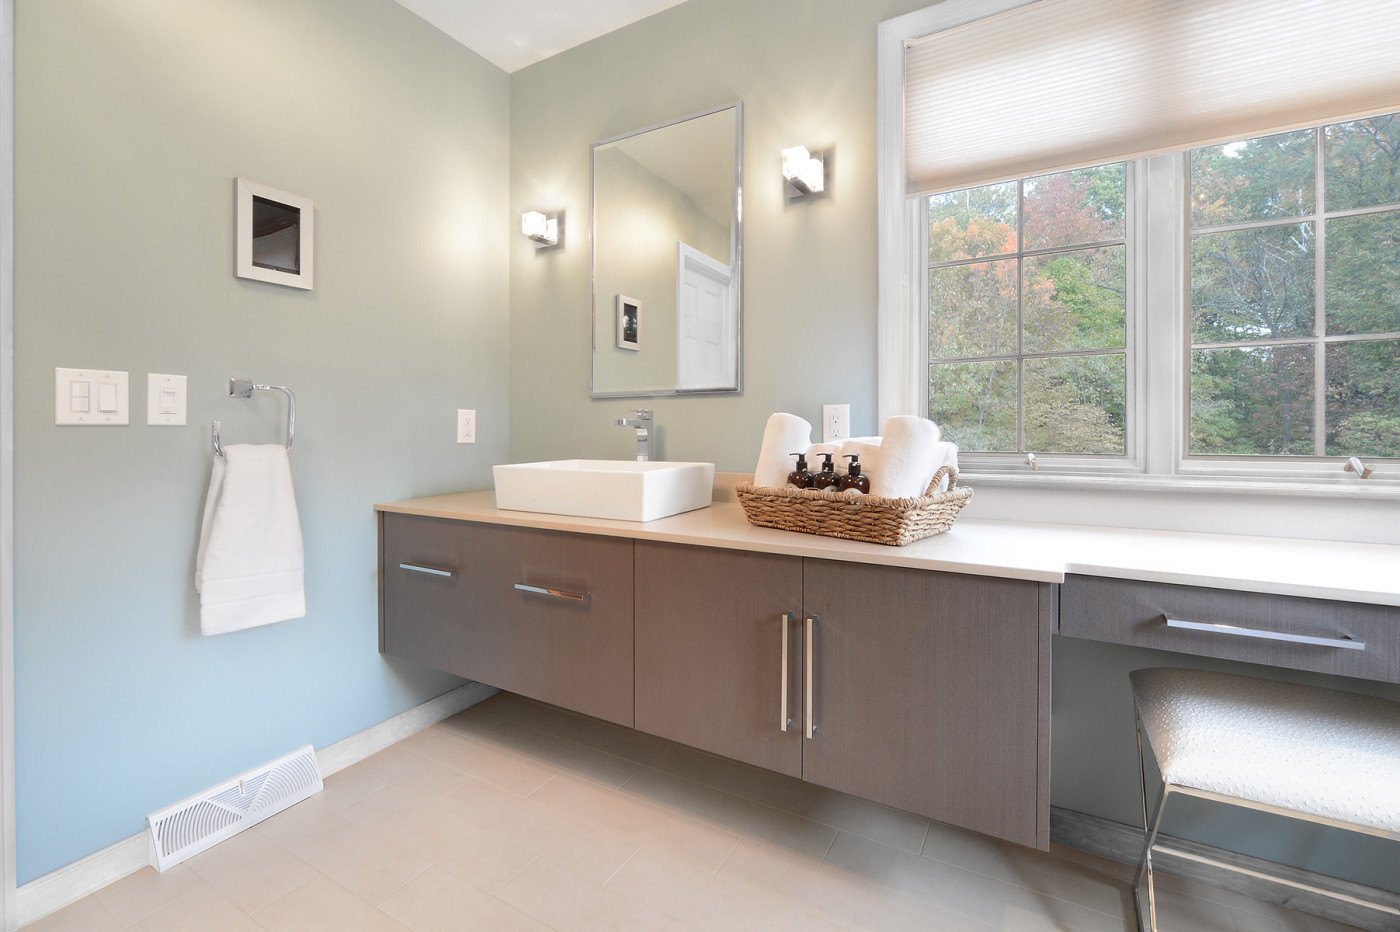 A vessel sink and a floating vanity complete the spa look. Bathroom renovation by Saratoga Springs bathroom remodeler and general contractor Teakwood Builders.